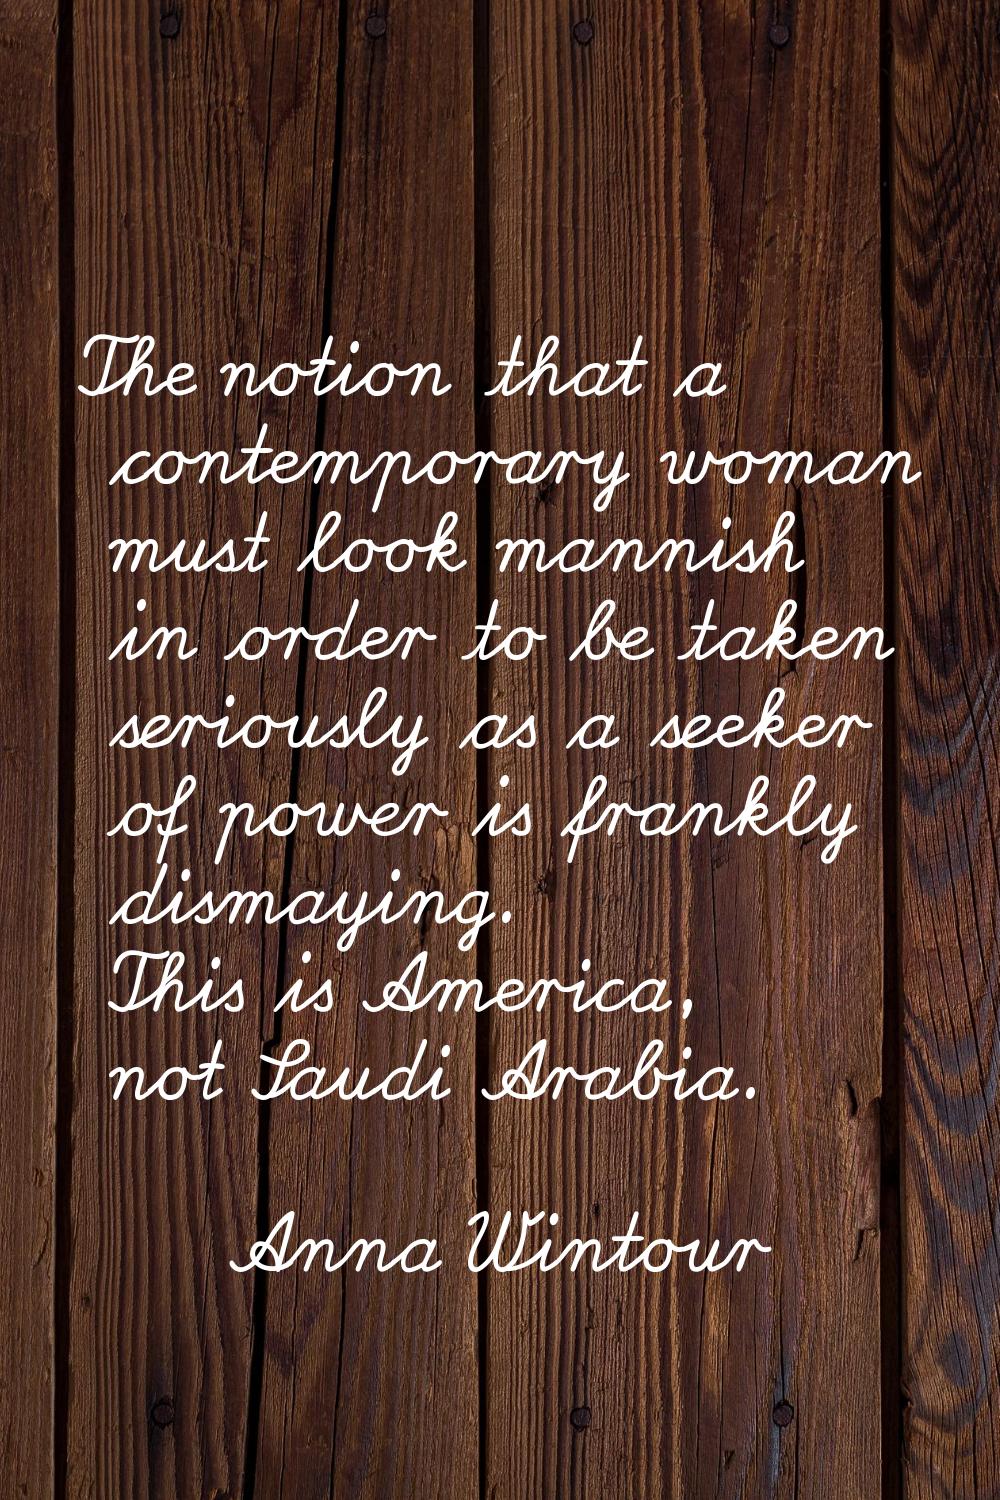 The notion that a contemporary woman must look mannish in order to be taken seriously as a seeker o